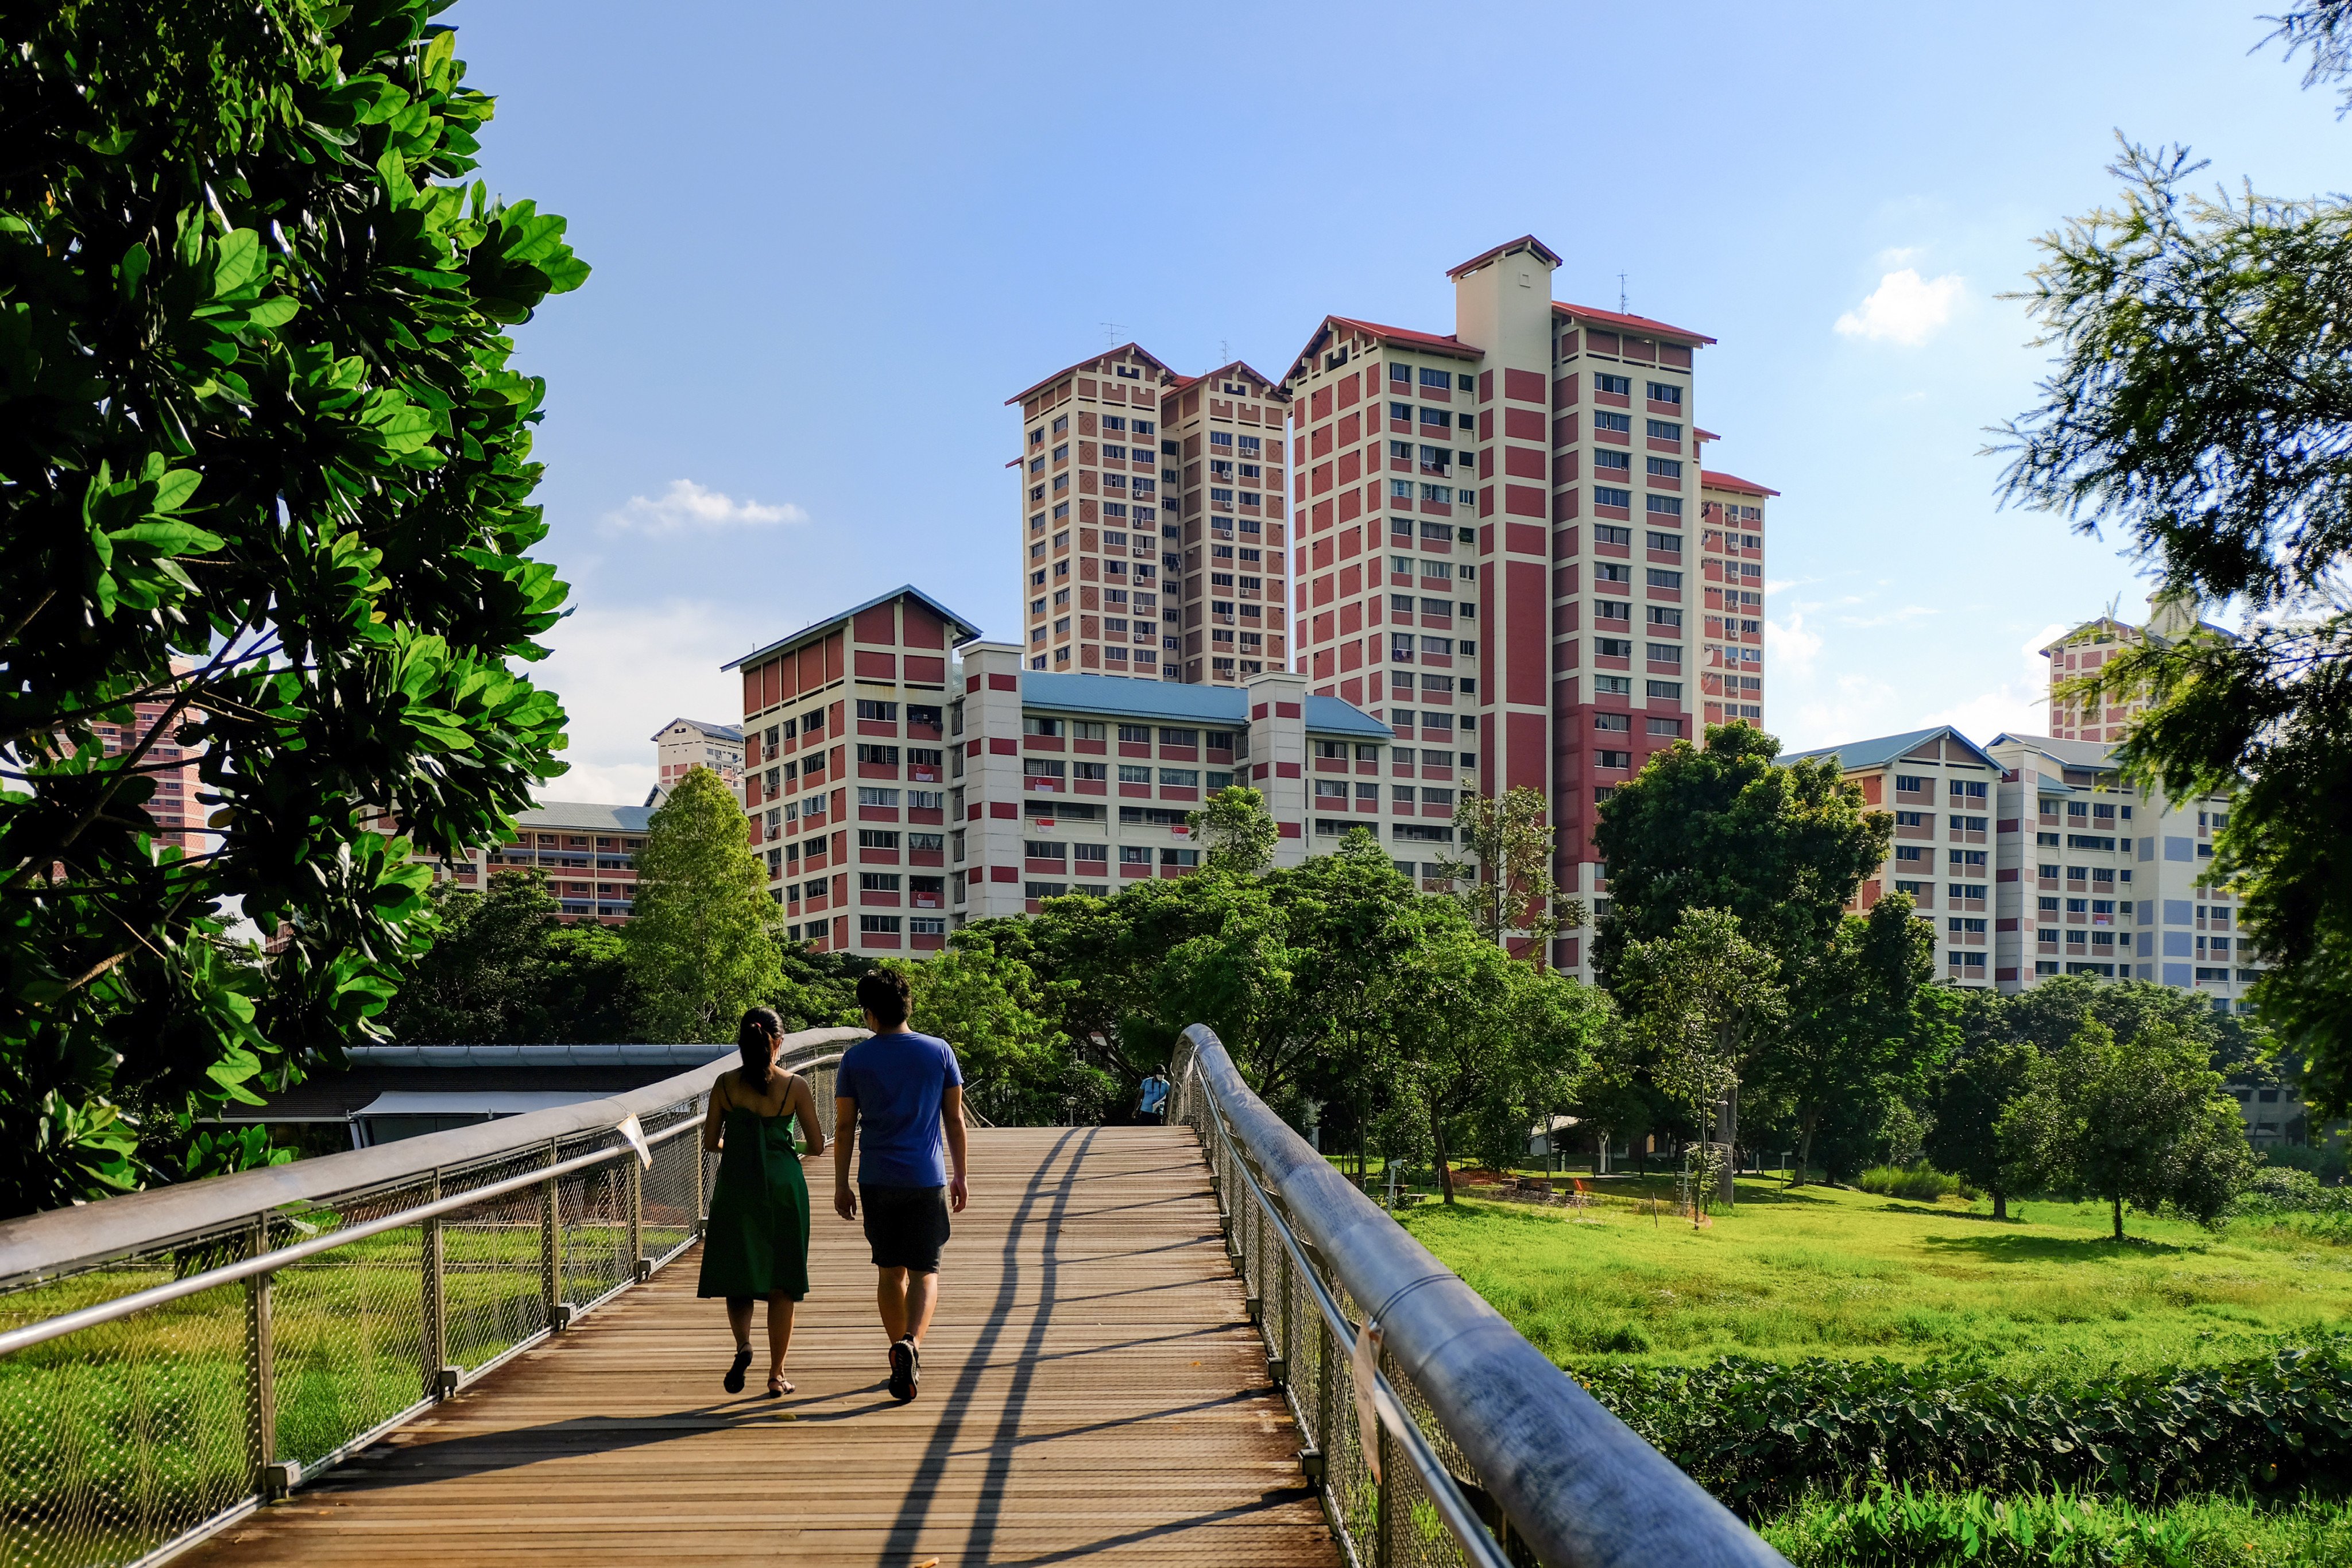 A couple enjoying a walk in Singapore with public houses (HDB flats) in the background. Photo: Shutterstock